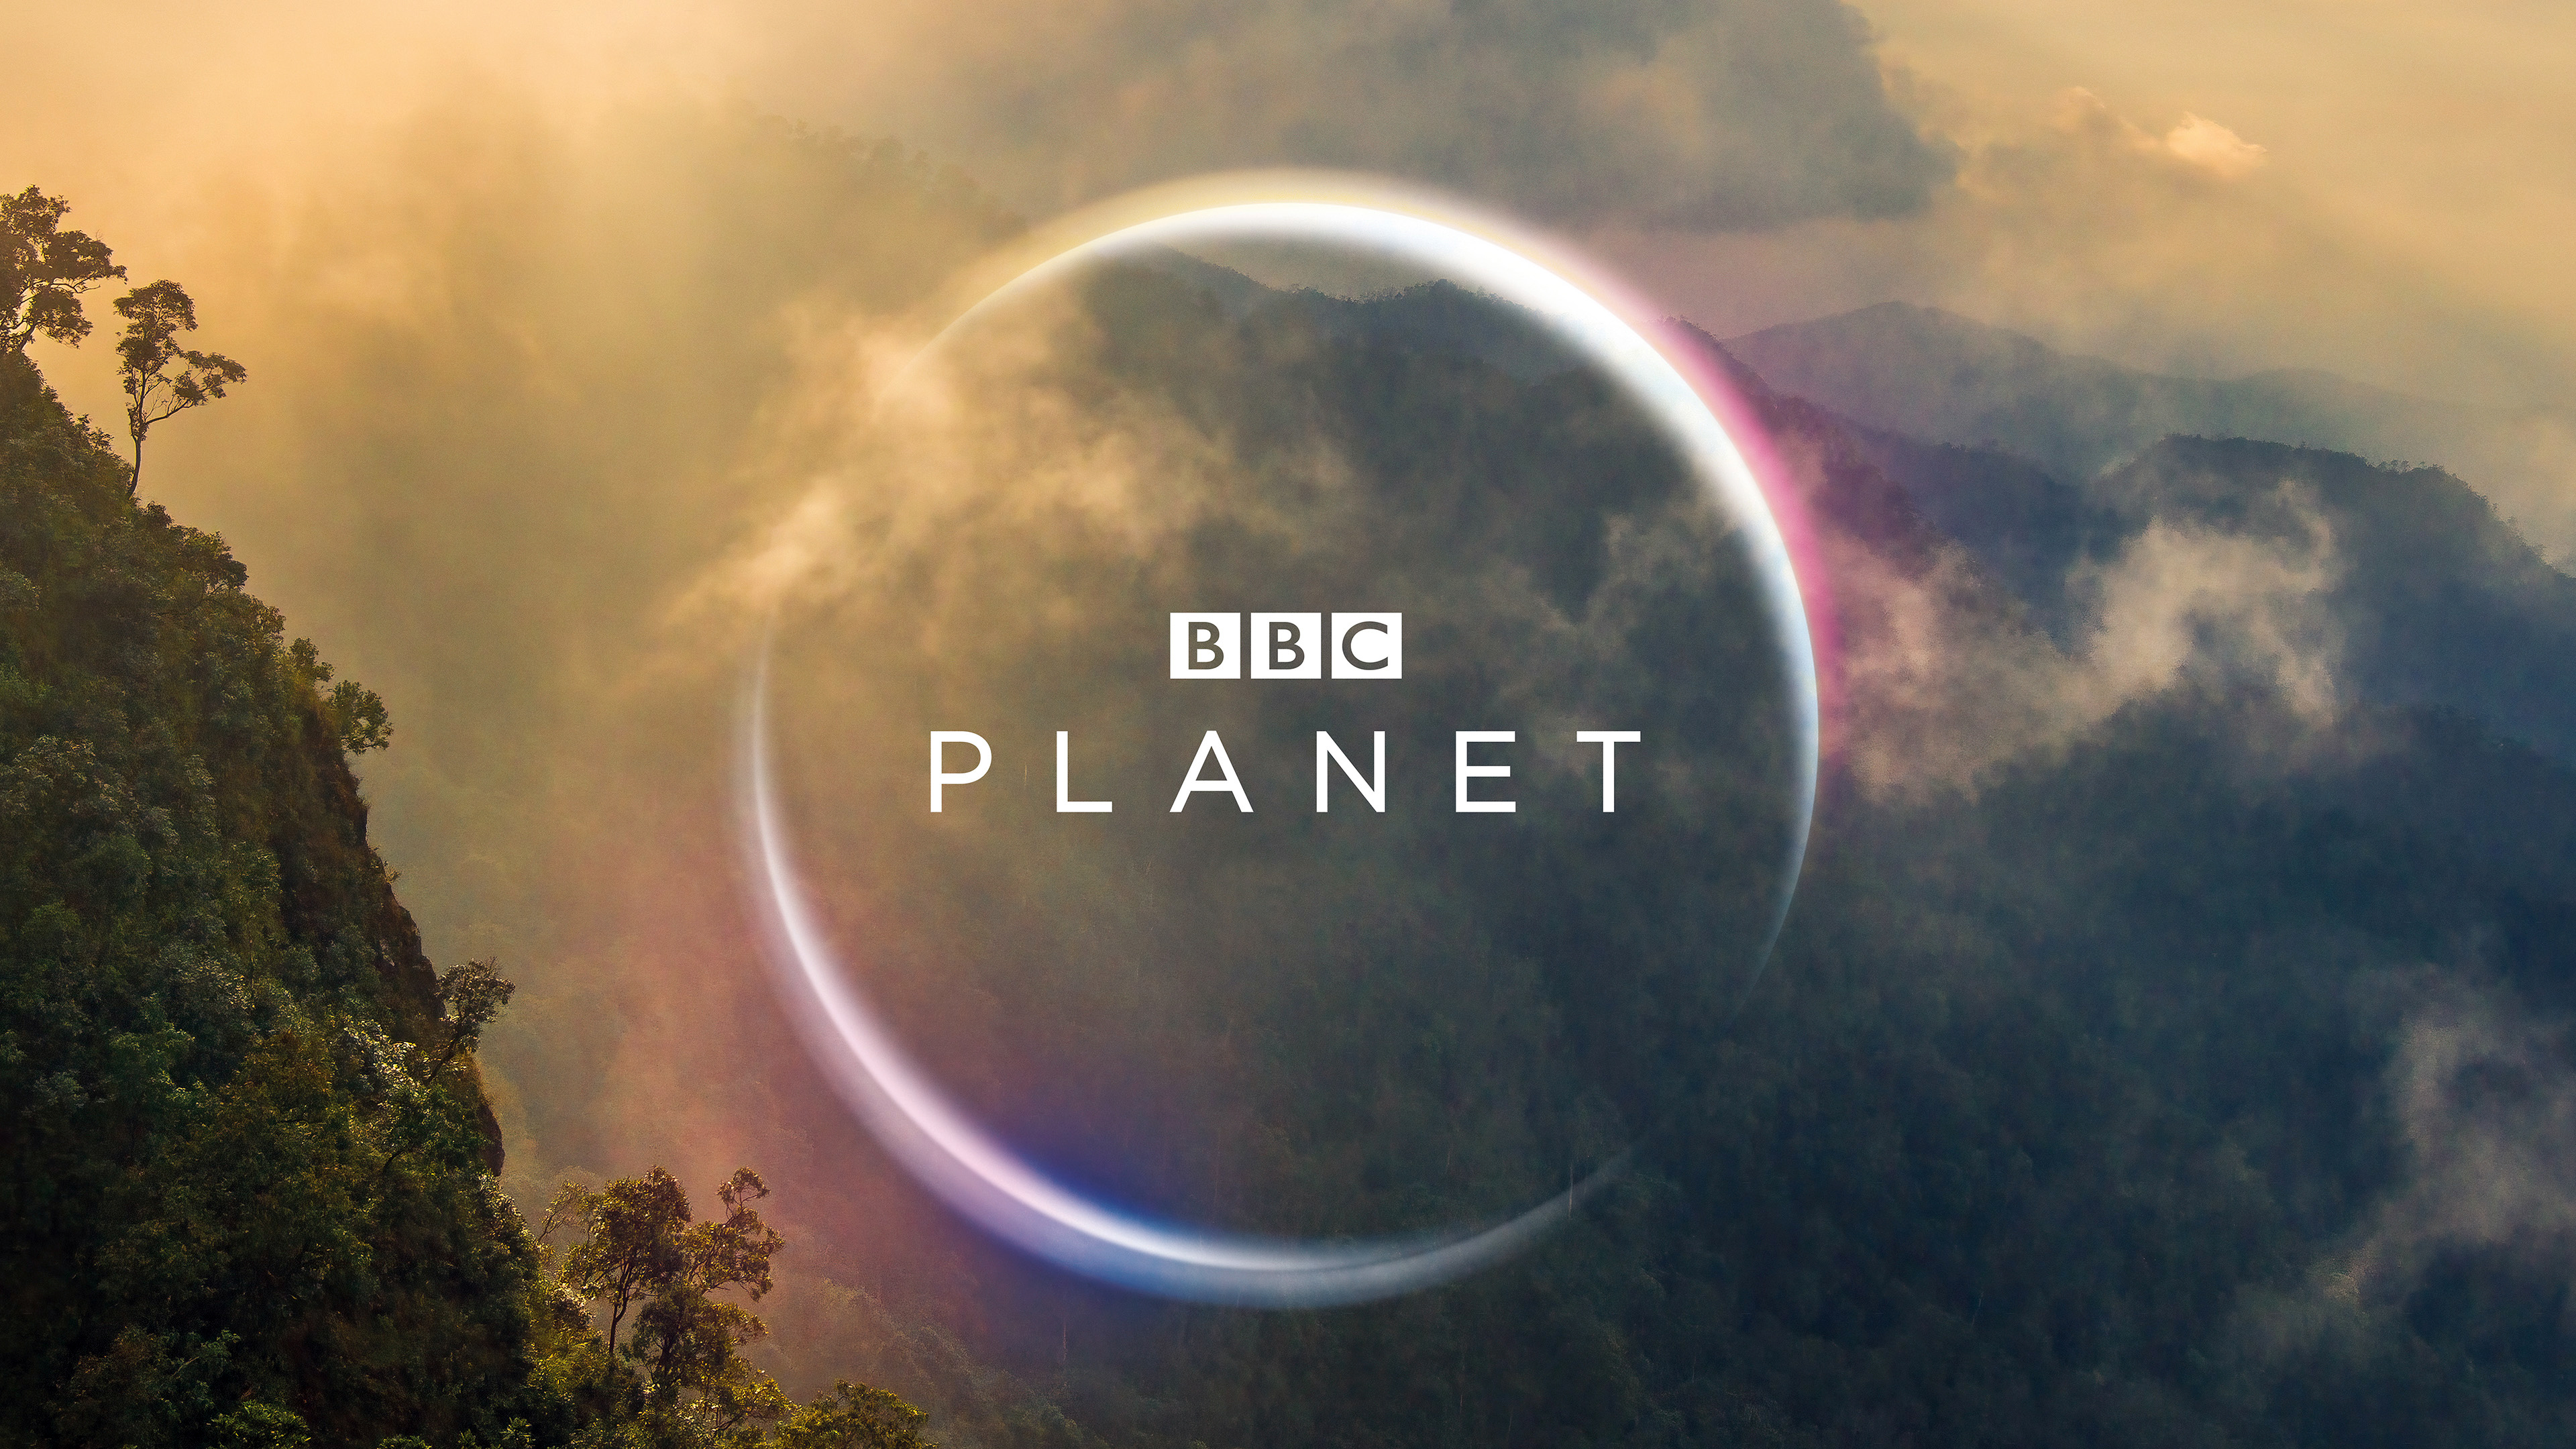 TV Show BBC Planet Series HD Wallpaper | Background Image